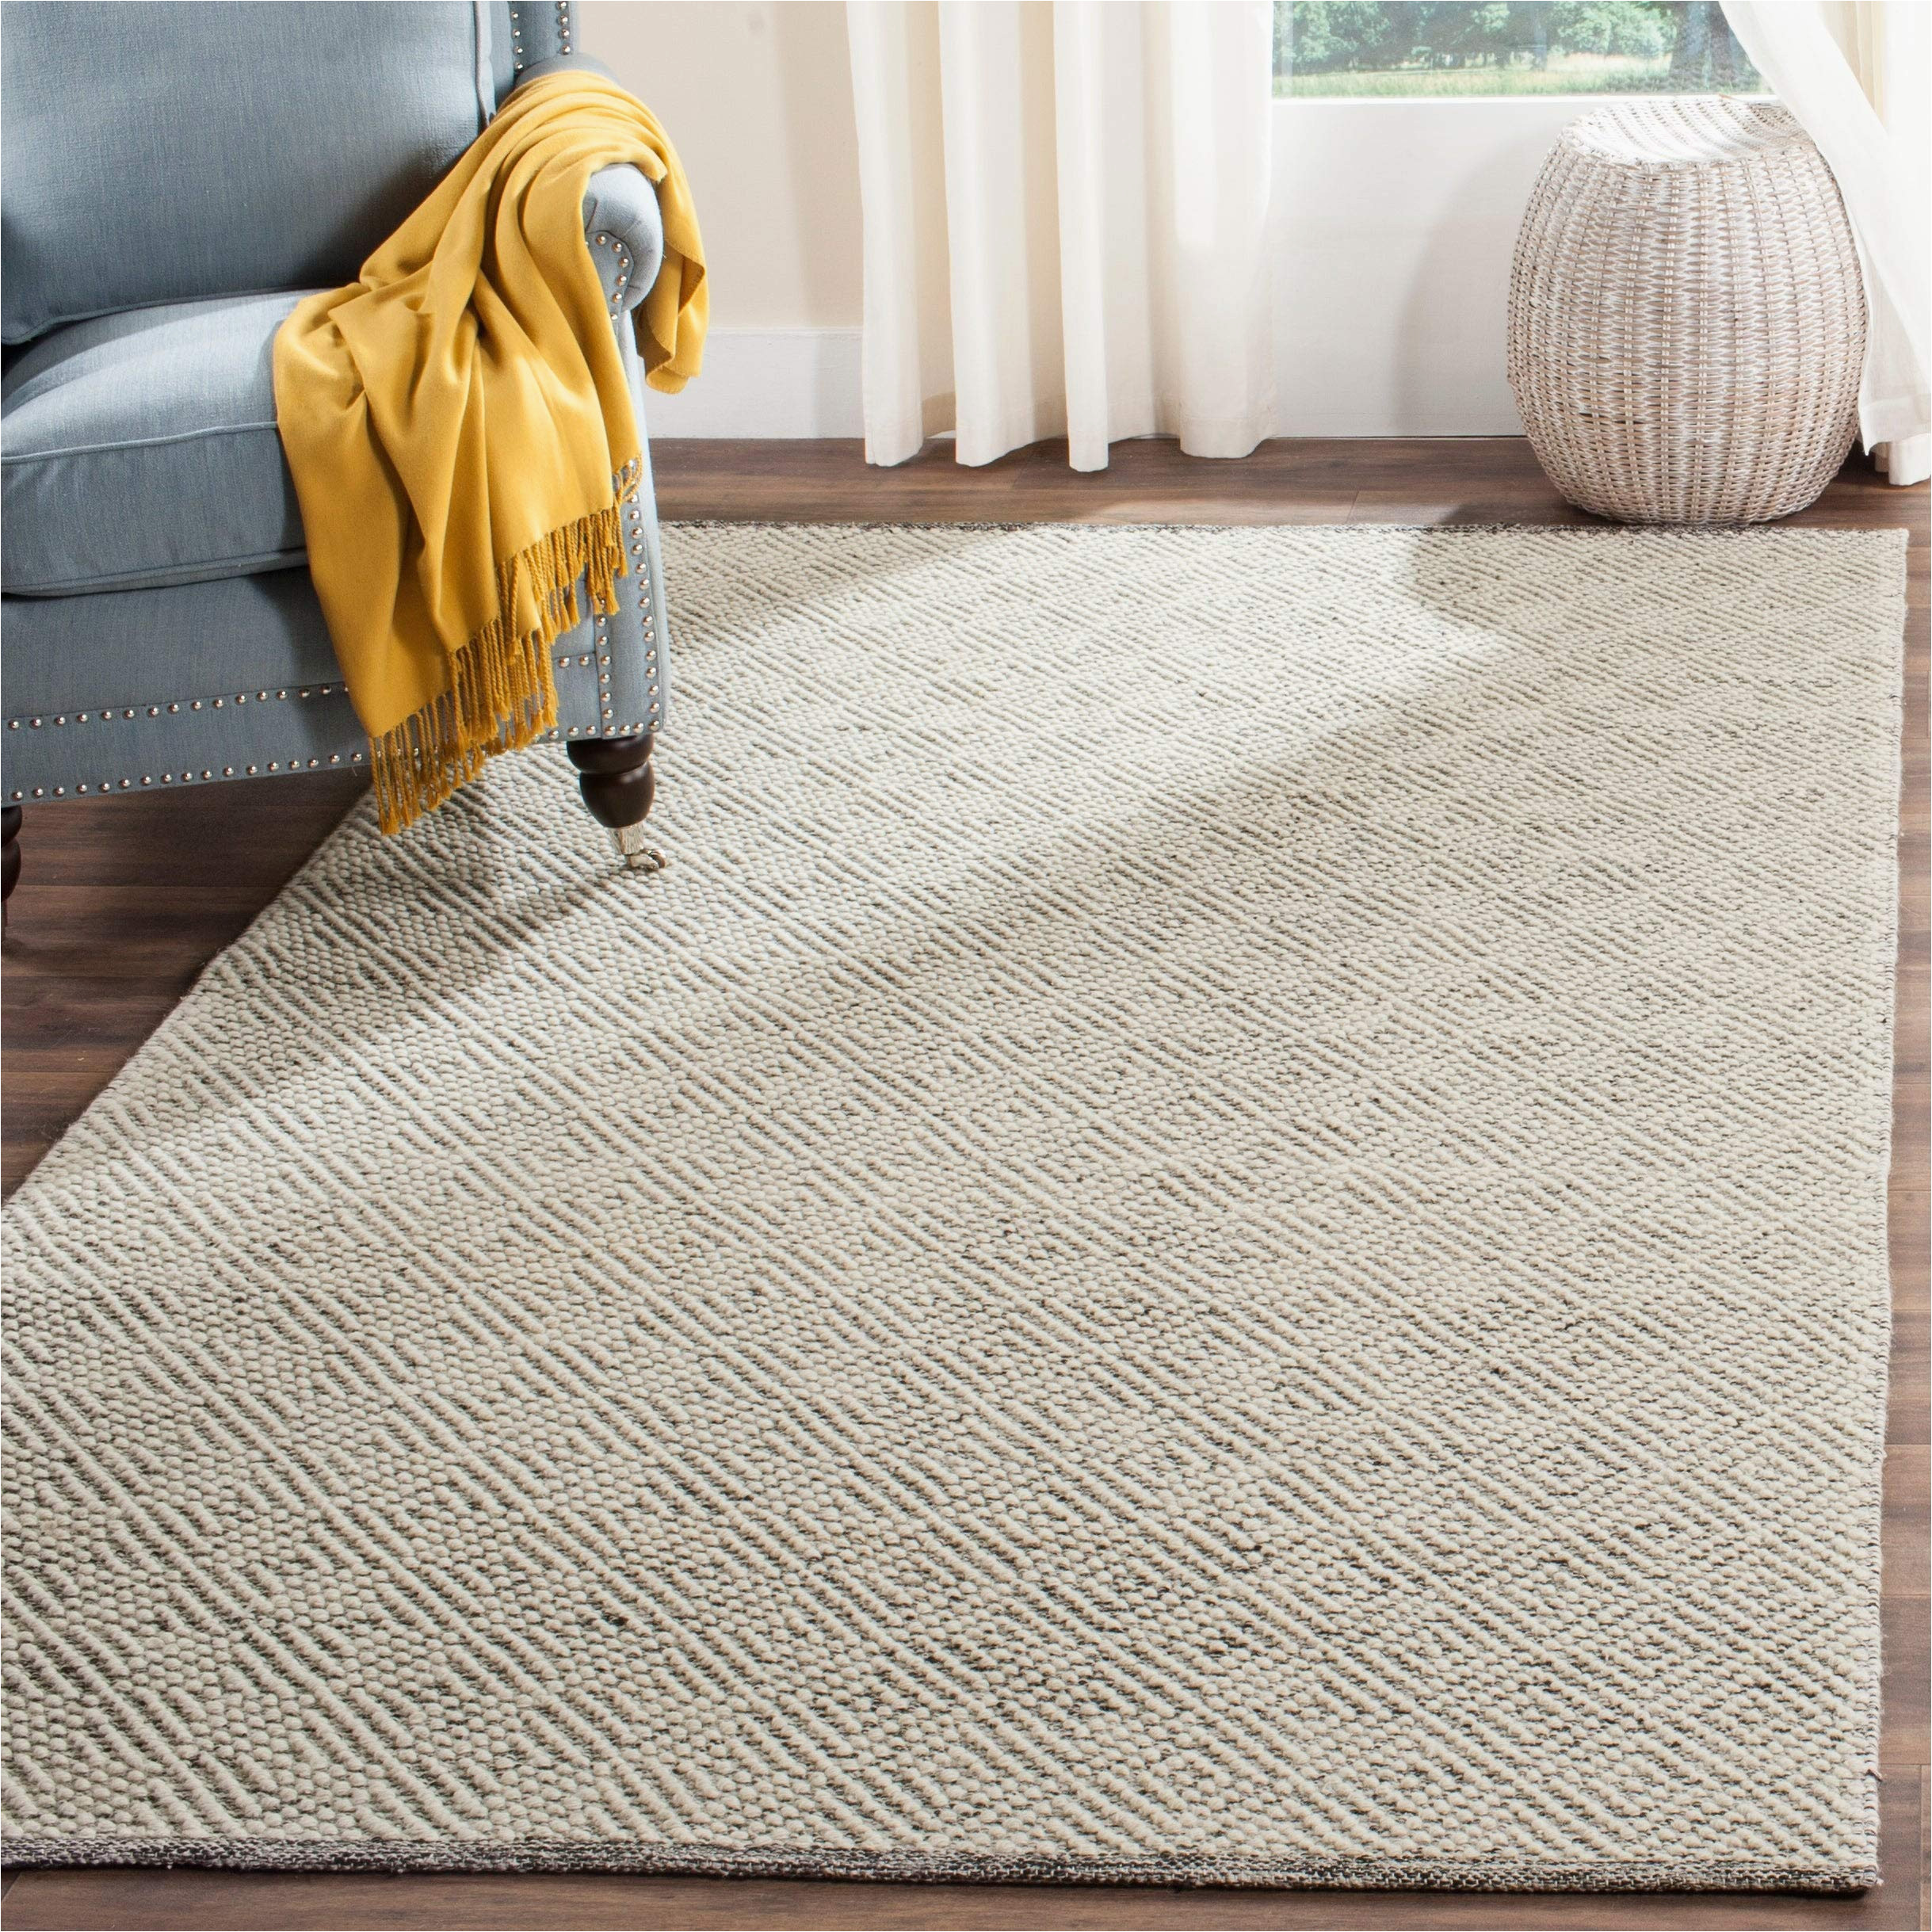 Grey and Ivory area Rug 8×10 Safavieh Natura Collection 8′ X 10′ Ivory / Light Grey Nat503a Handmade Premium Wool area Rug